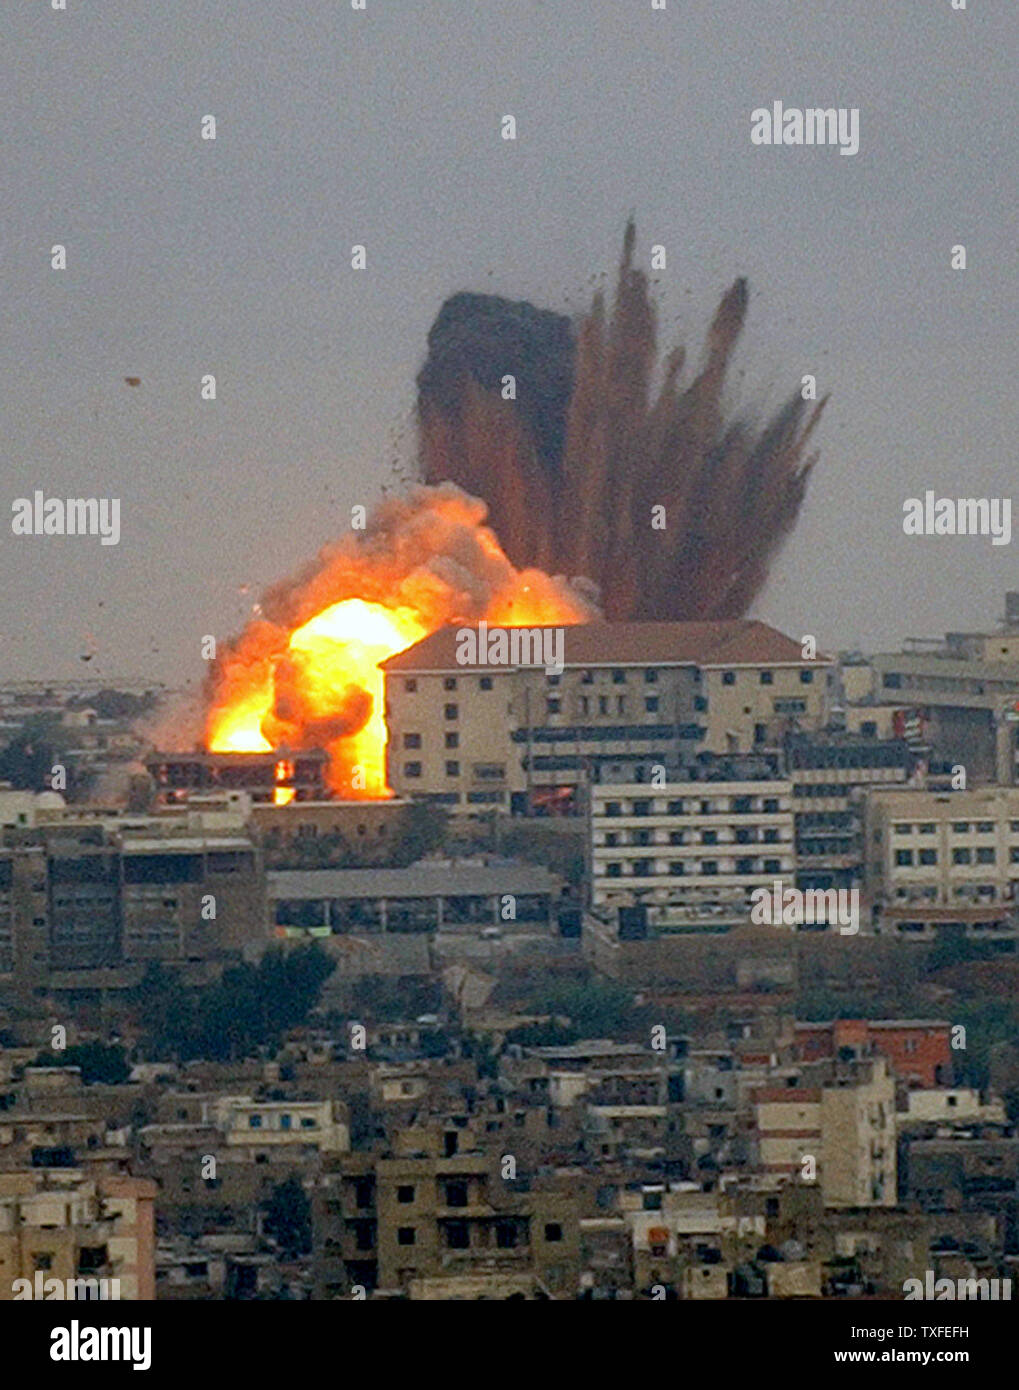 A Hezbollah youth and sports center in Ouzai, Beirut's southern suburbs, takes a direct hit by an Israeli bomb in the early hours of Friday August 4, 2006. In less than an hour the neighborhood of Ouzai took 19 Israeli missiles. In the north, along the coast highway four main bridges were knocked out cutting off Beirut from the northern part of Lebanon.   (UPI Photo) Stock Photo